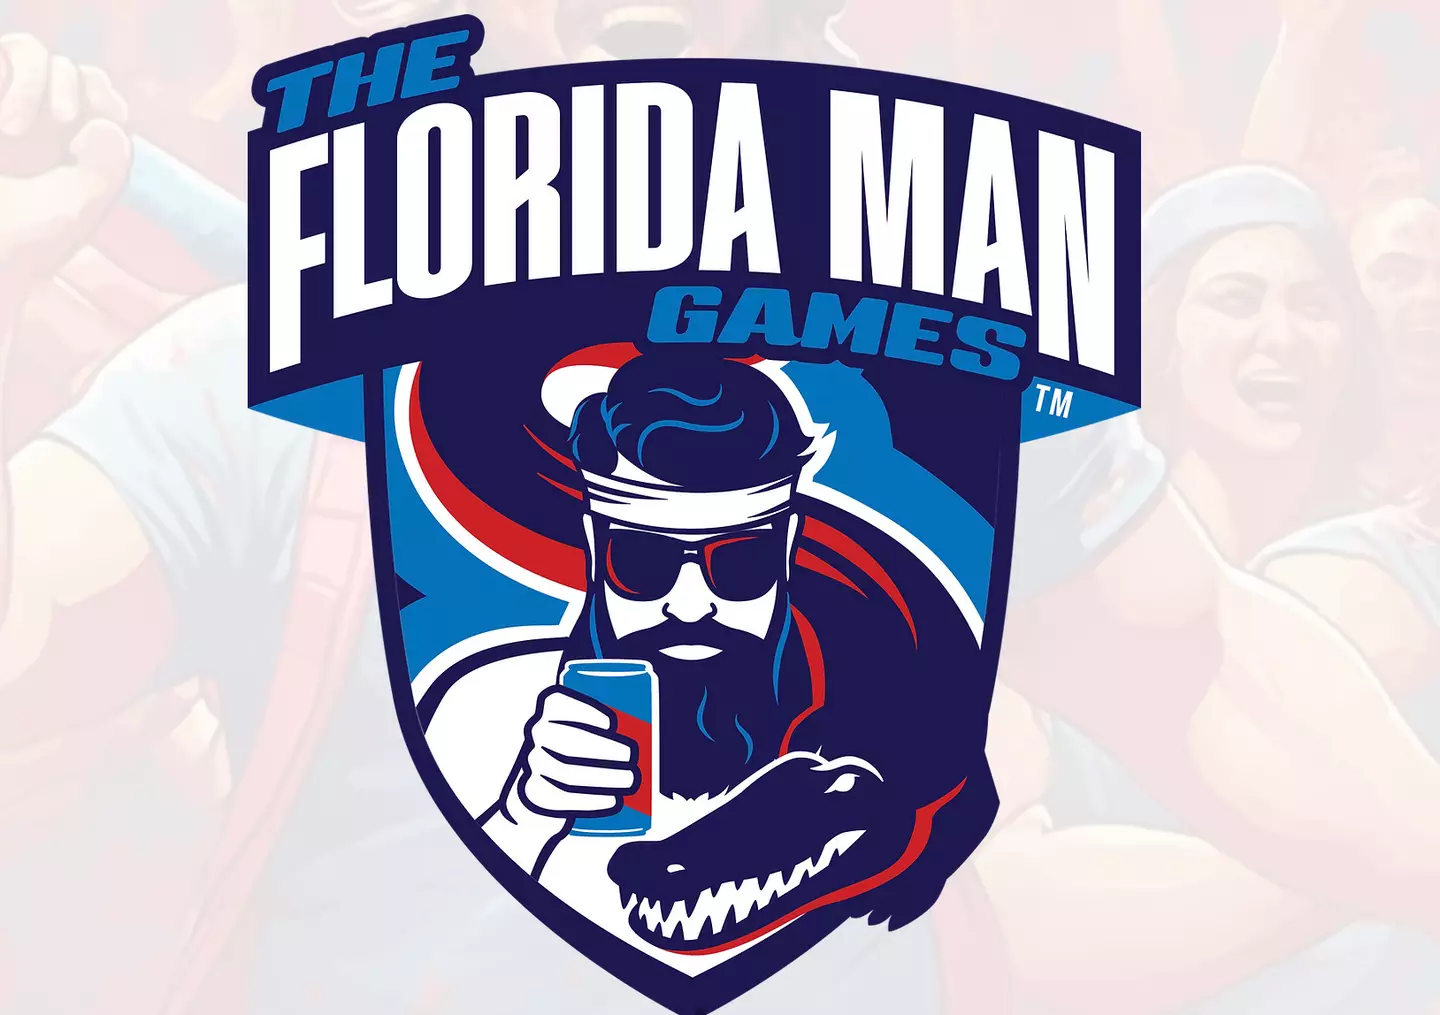 The Florida Man Games will take place in St. Augustine.